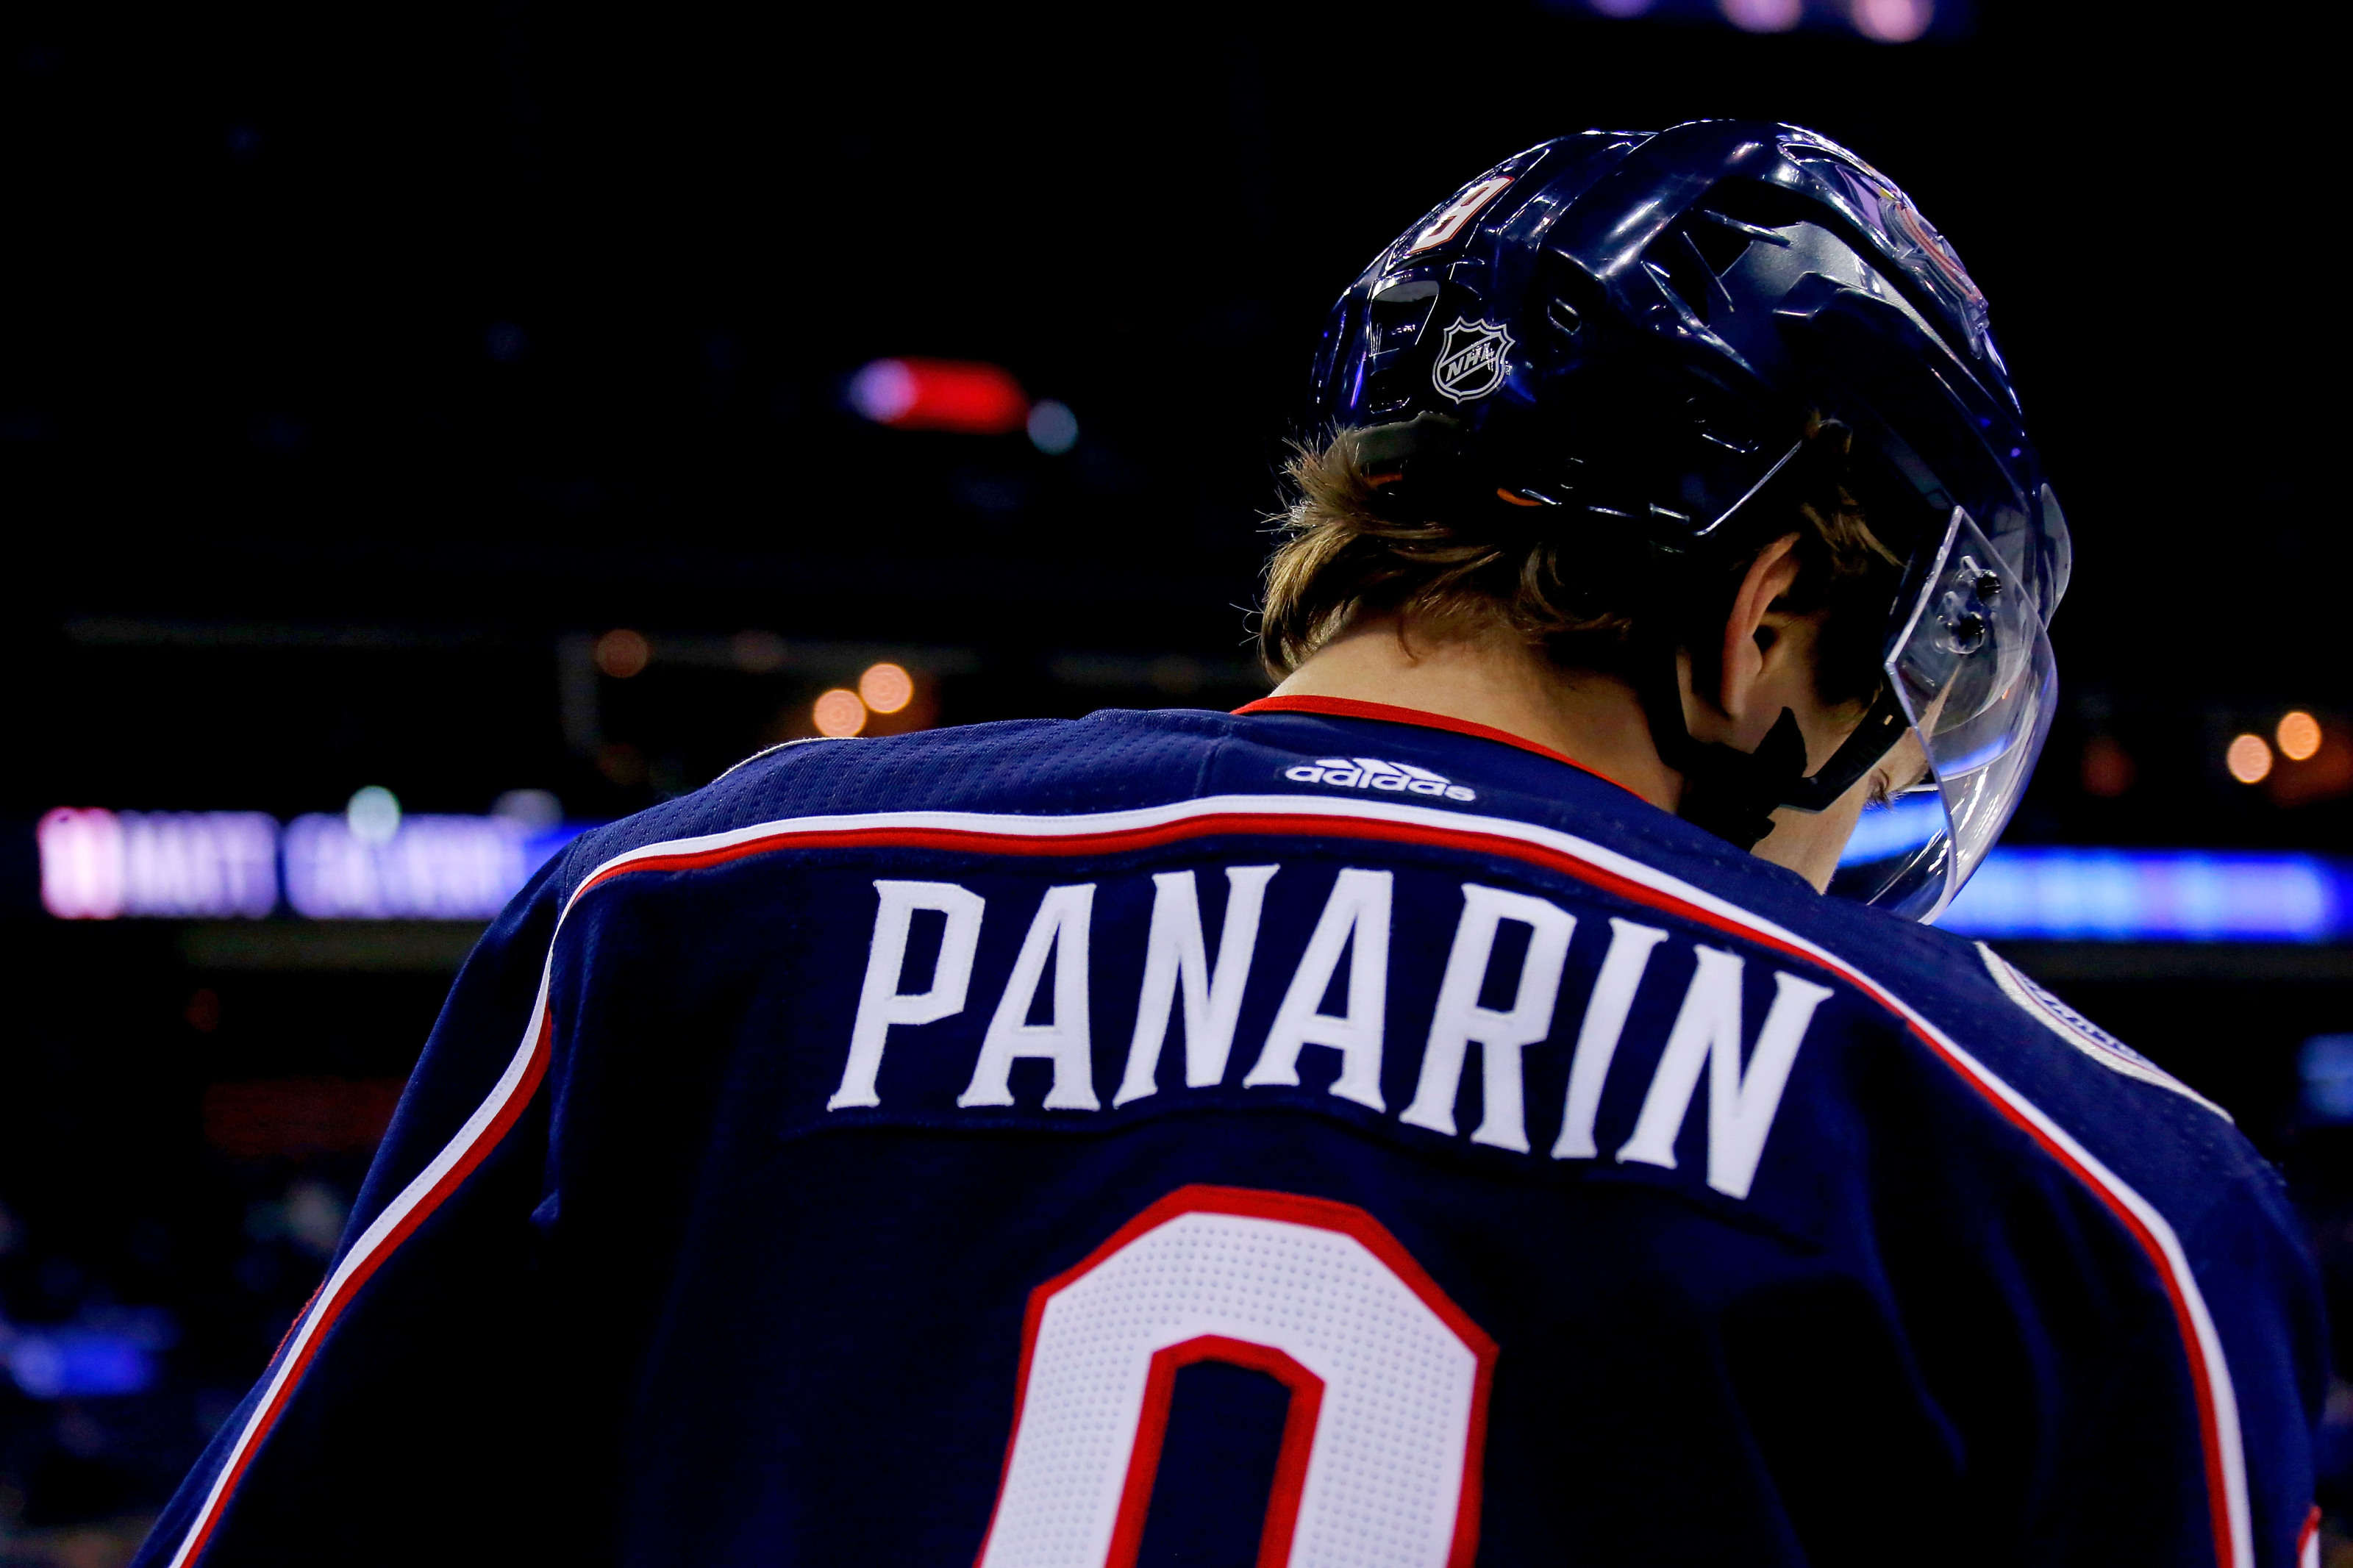 Could the New York Rangers Part Ways With Artemi Panarin? - The